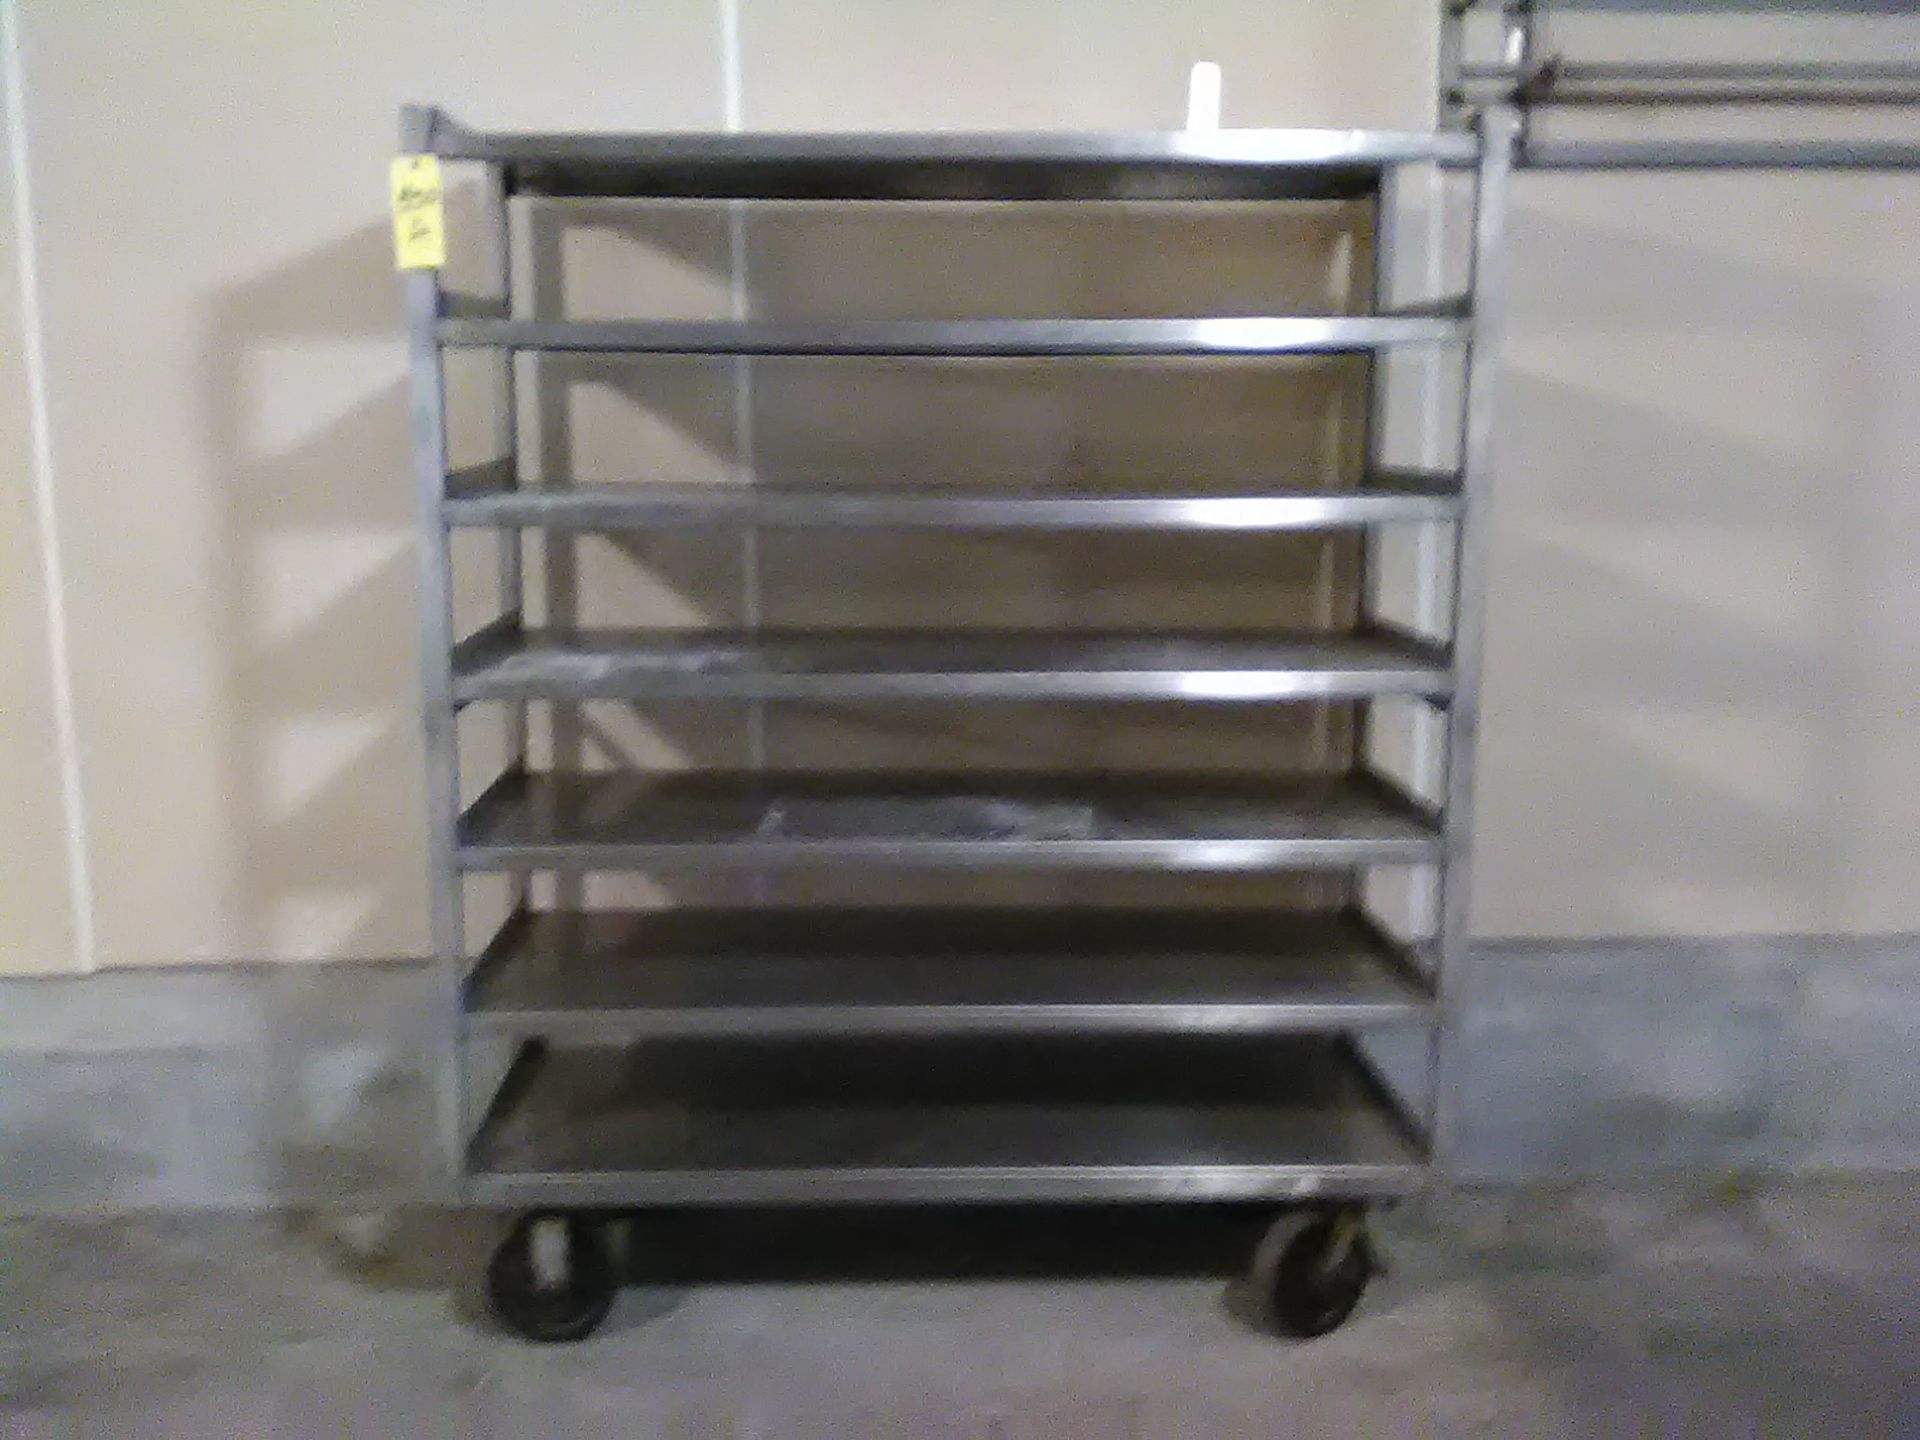 STAINLESS STEEL CART ON CASTERS. 7 SHELVES.